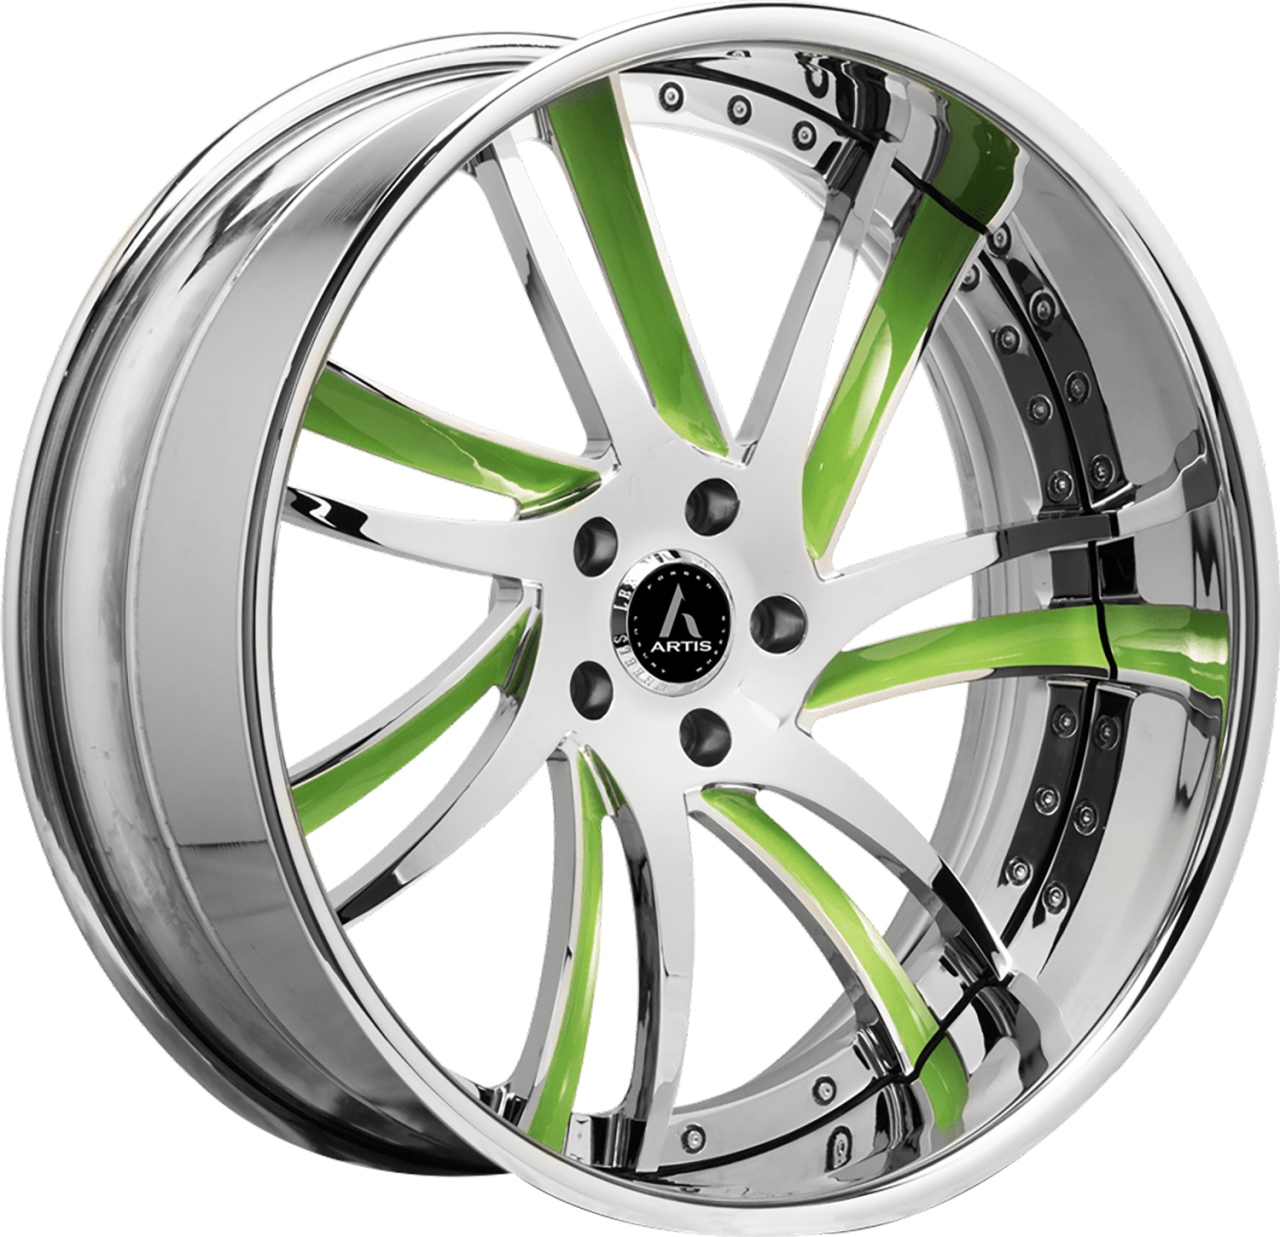 Artis Forged Profile wheel with Custom Chrome with Green Accents finish